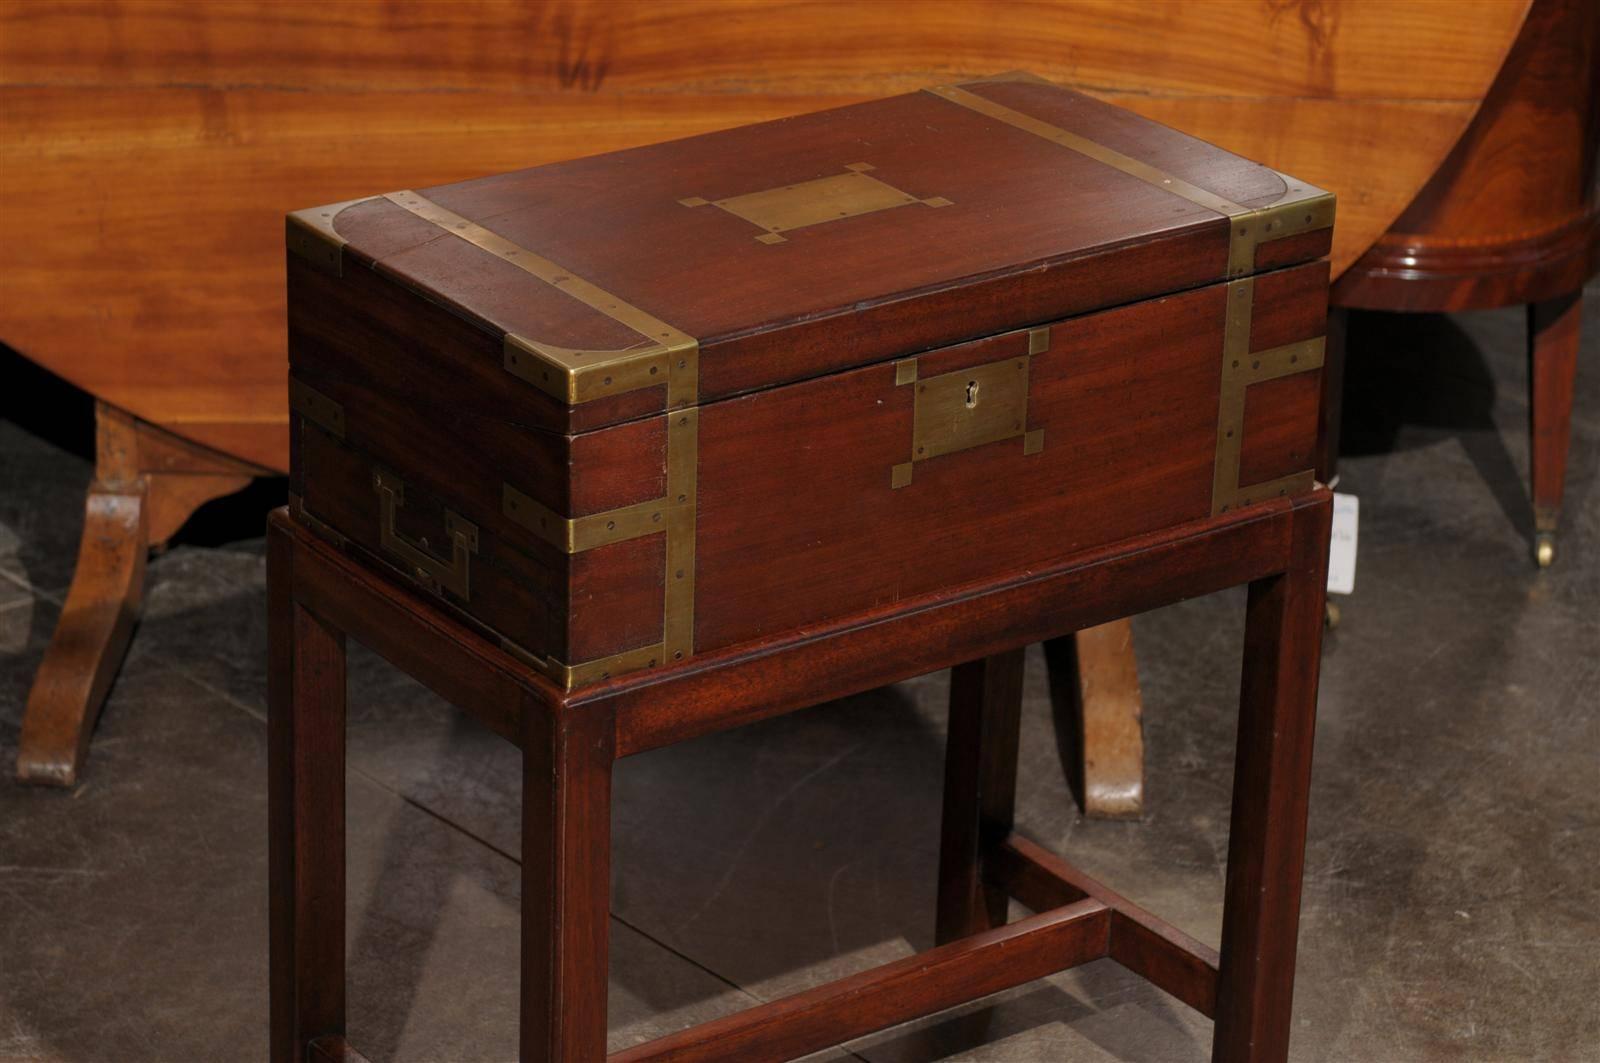 19th Century English Lap Desk Writing Box with Brass Accents and Custom Stand, circa 1860